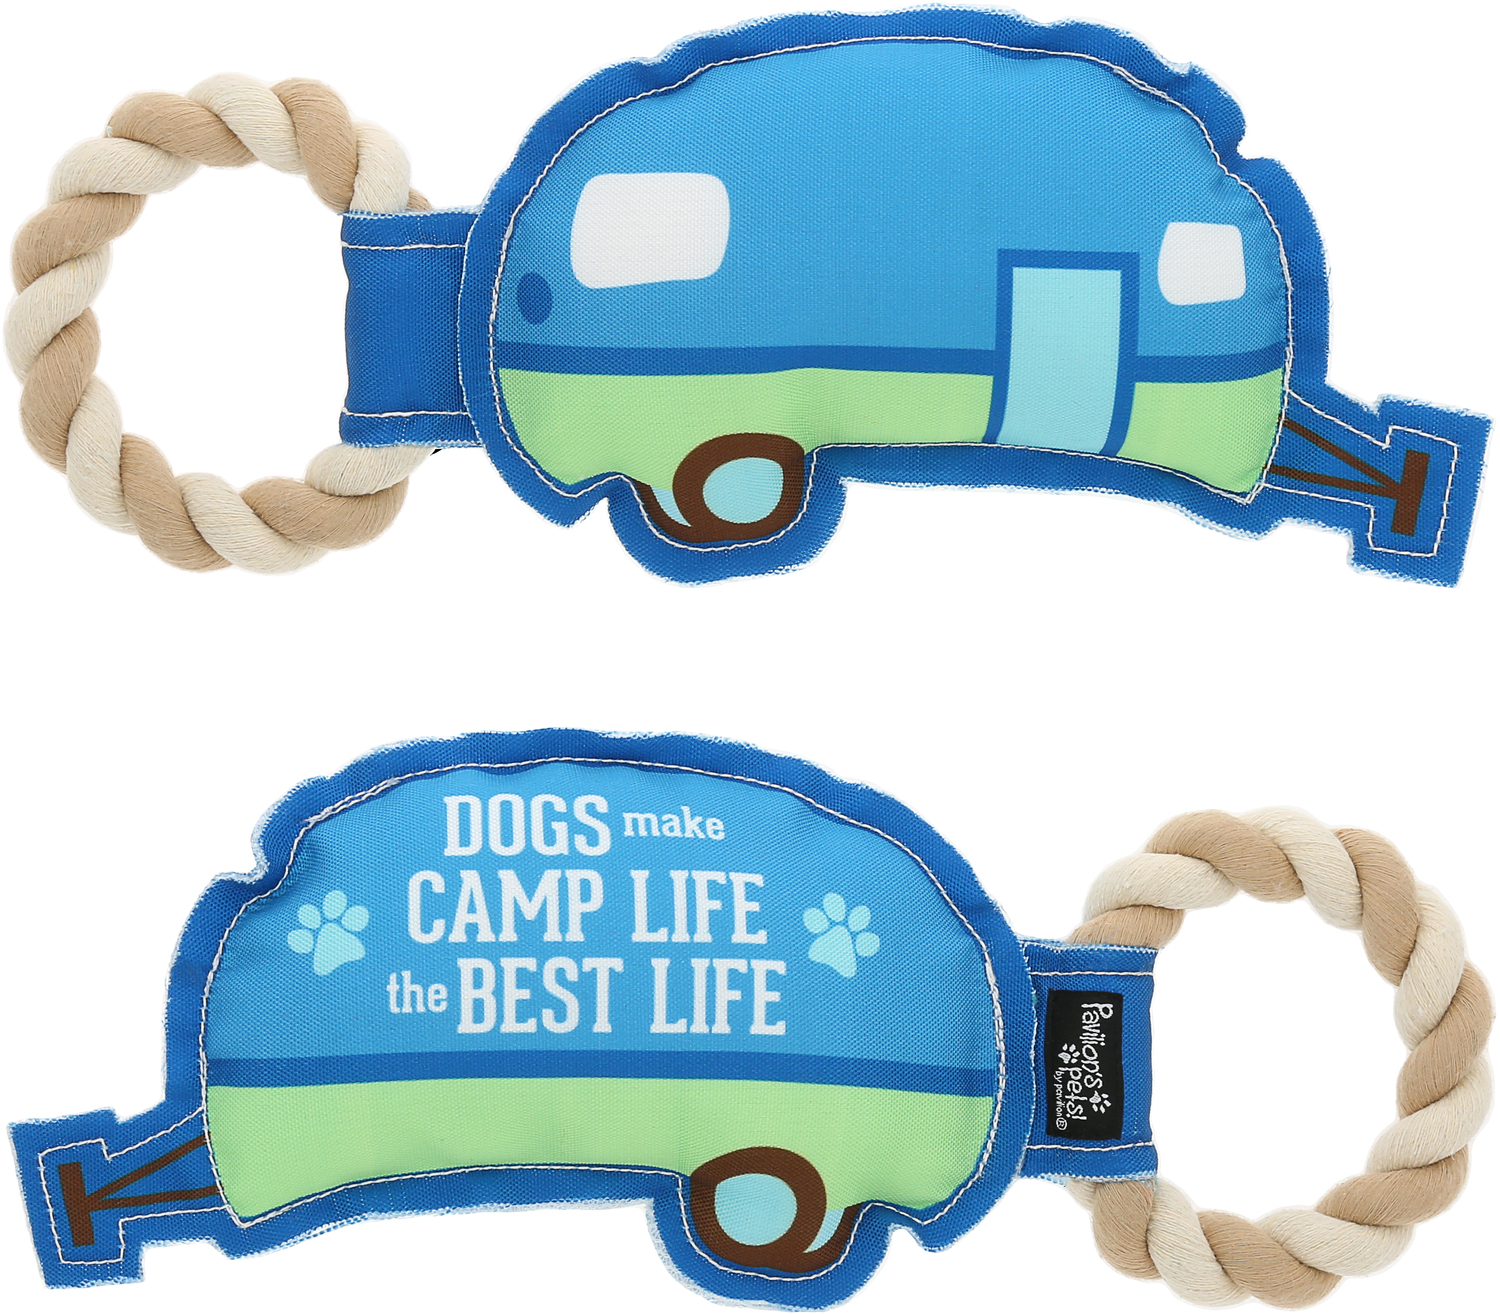 Camp Life by Pavilion's Pets - Camp Life - 10.5" Canvas Dog Toy on Rope